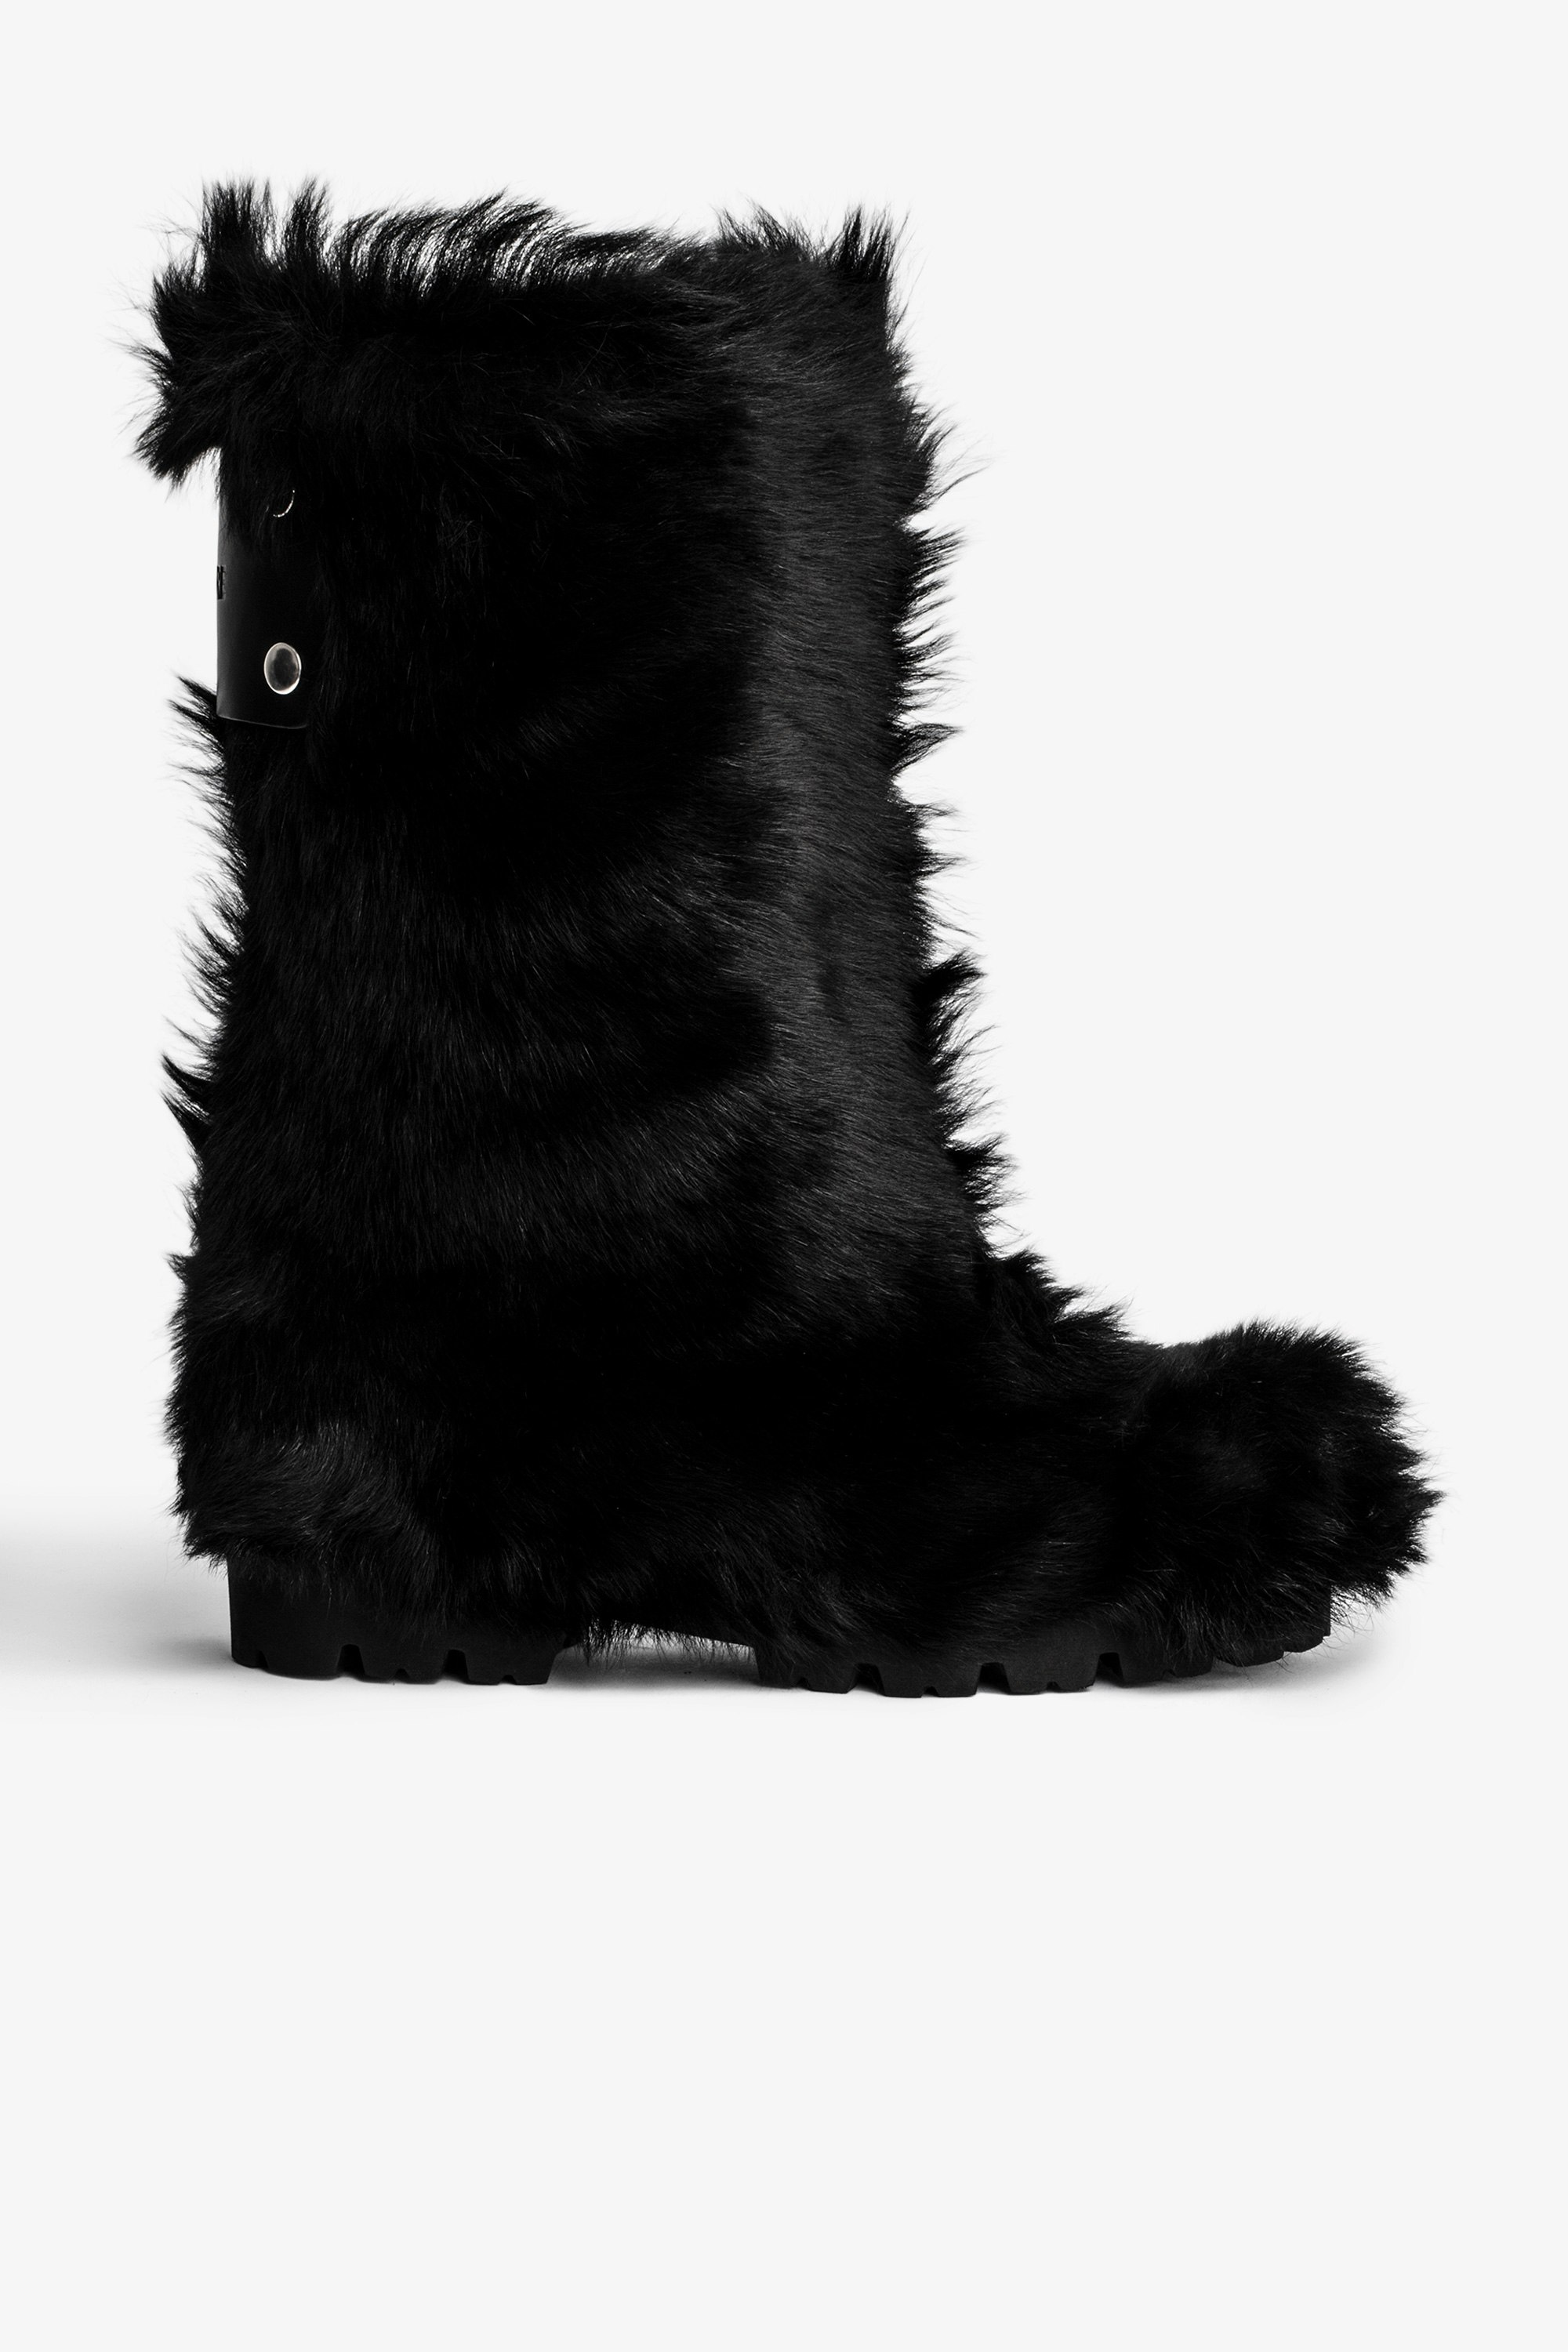 Joe Ankle Boots Women’s black faux fur ankle boots with a leather back panel featuring the brand logo